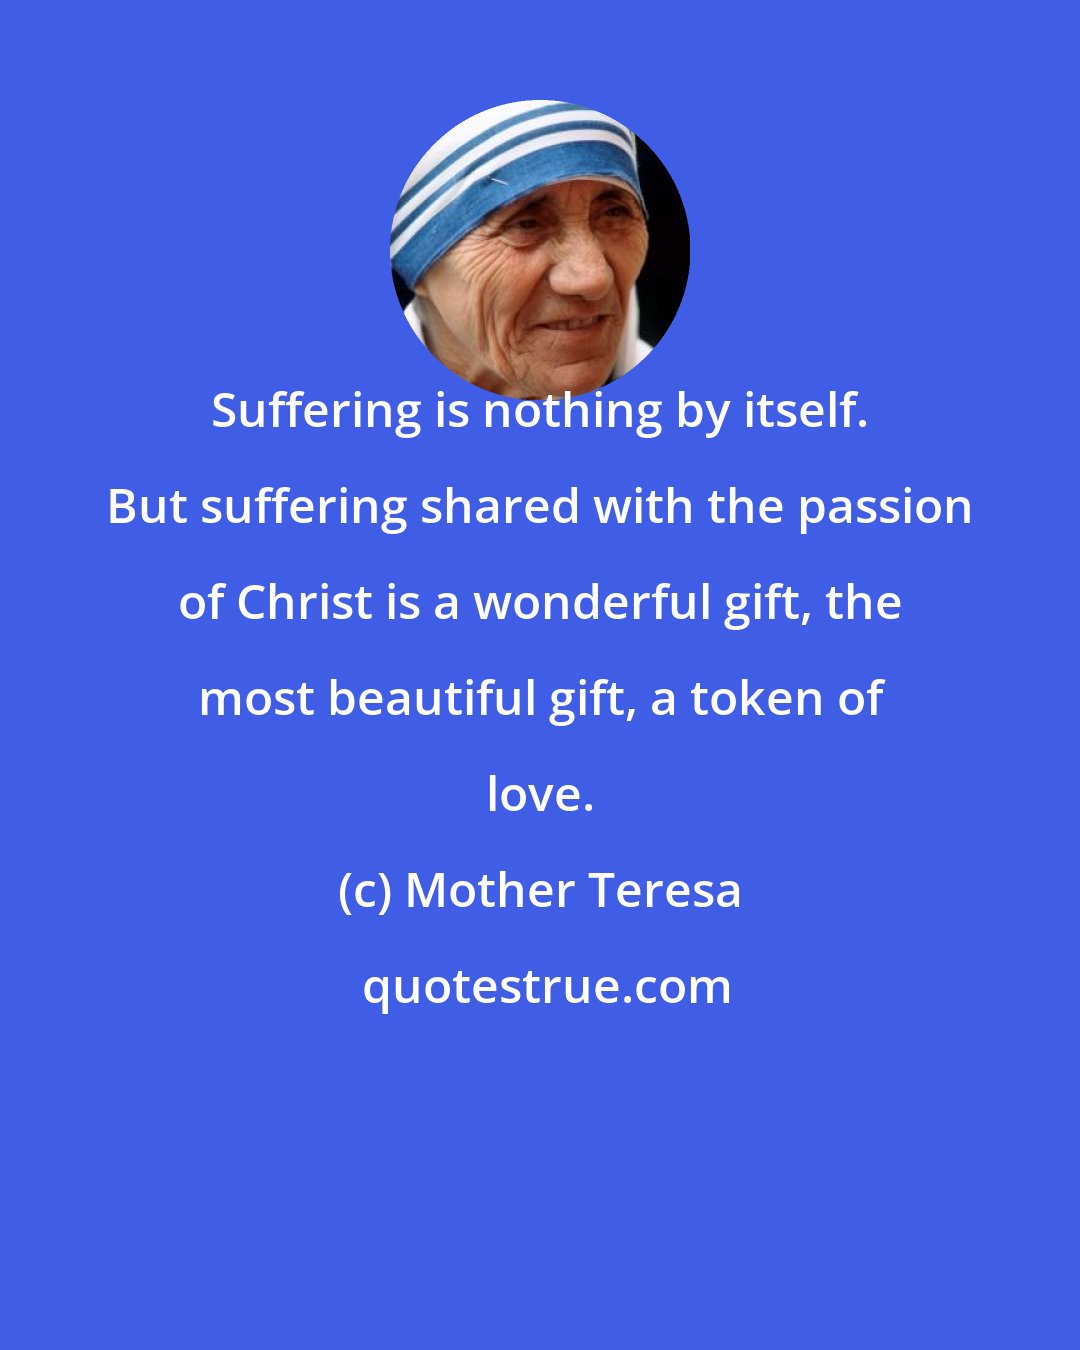 Mother Teresa: Suffering is nothing by itself. But suffering shared with the passion of Christ is a wonderful gift, the most beautiful gift, a token of love.